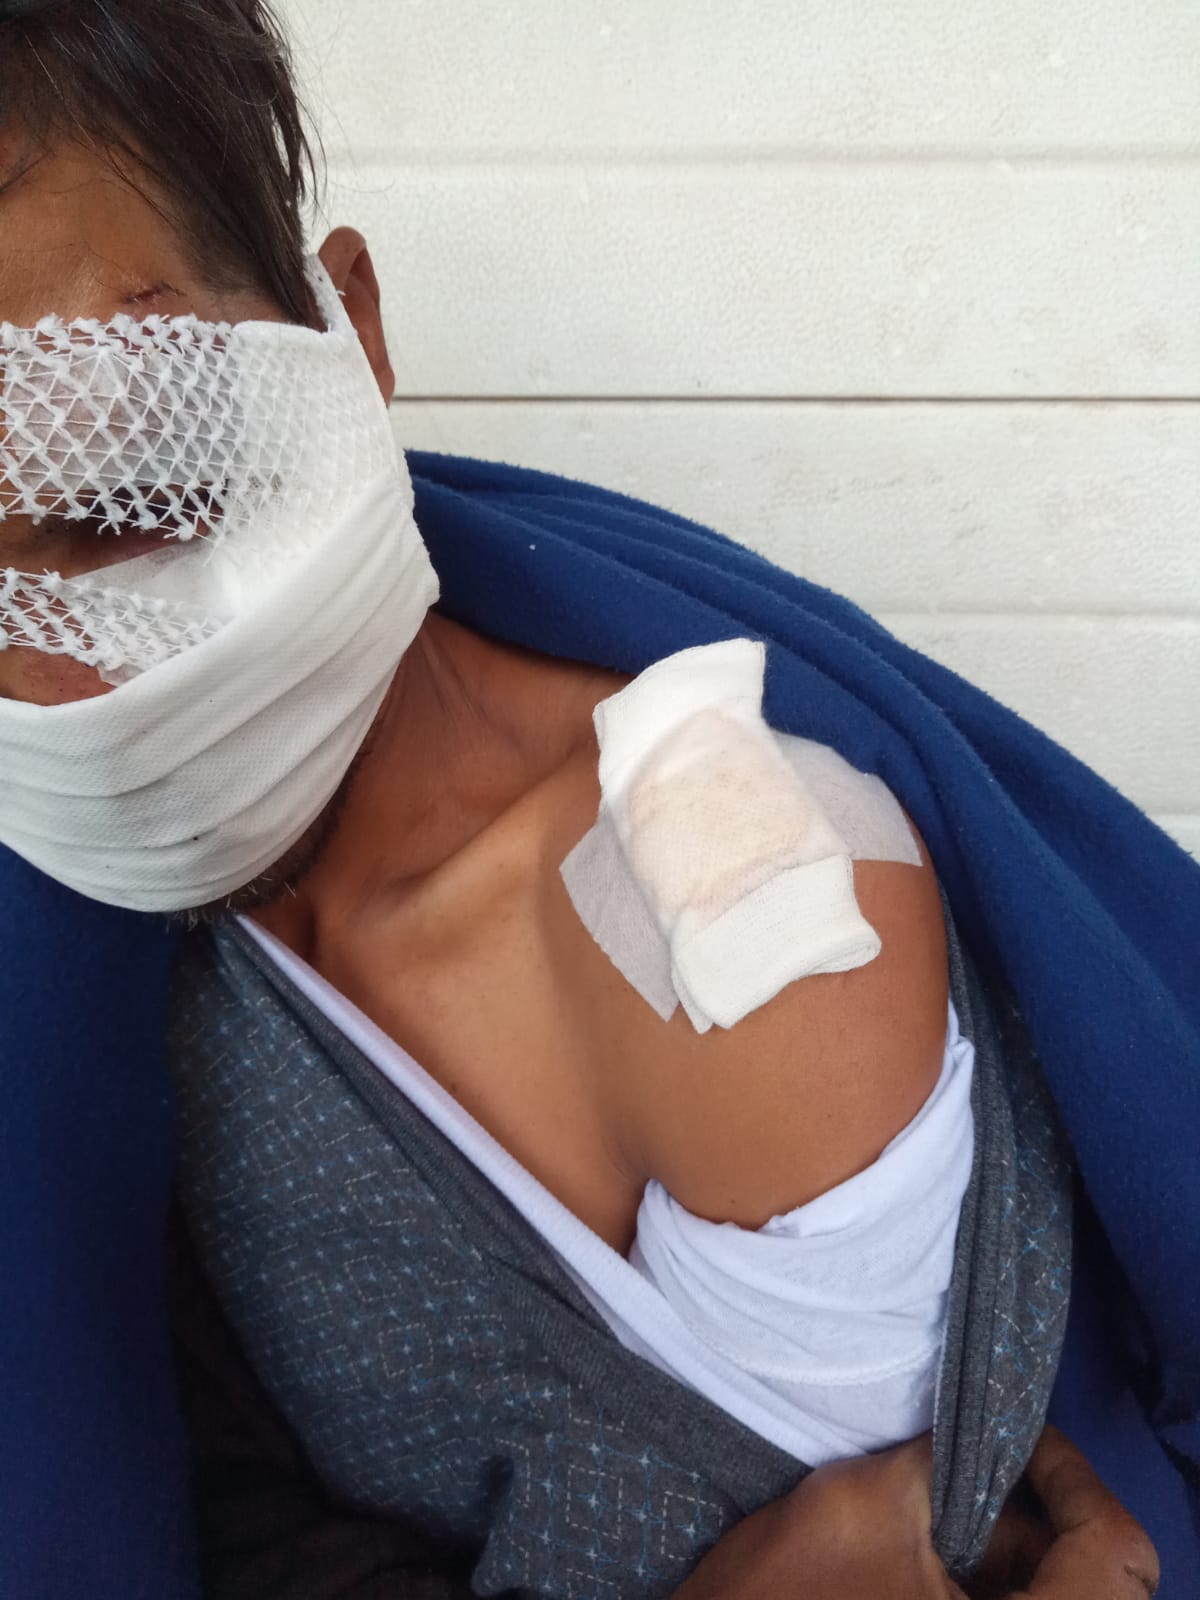 A migrant sustained severe head injury and a broken arm following a brutal beating by, what he stated was, six Croatian police officers during a pushback on October 16, 2020. 